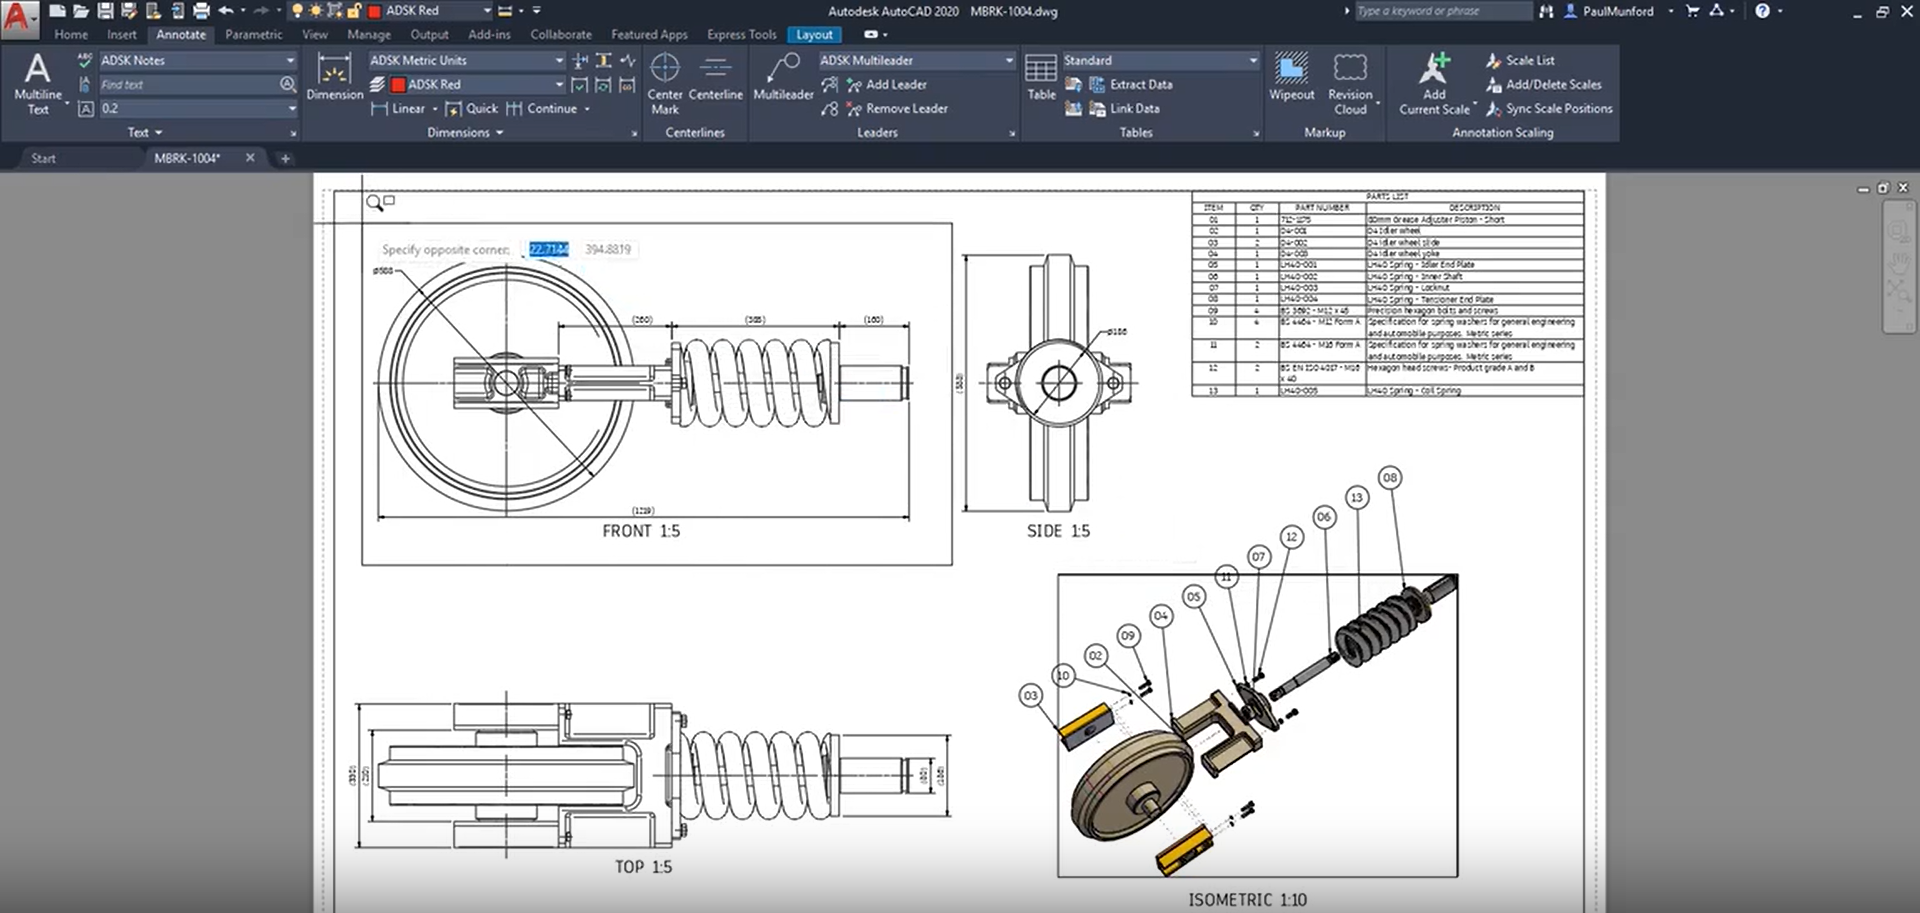 Screenshot of a model in Autodesk Inventor software 